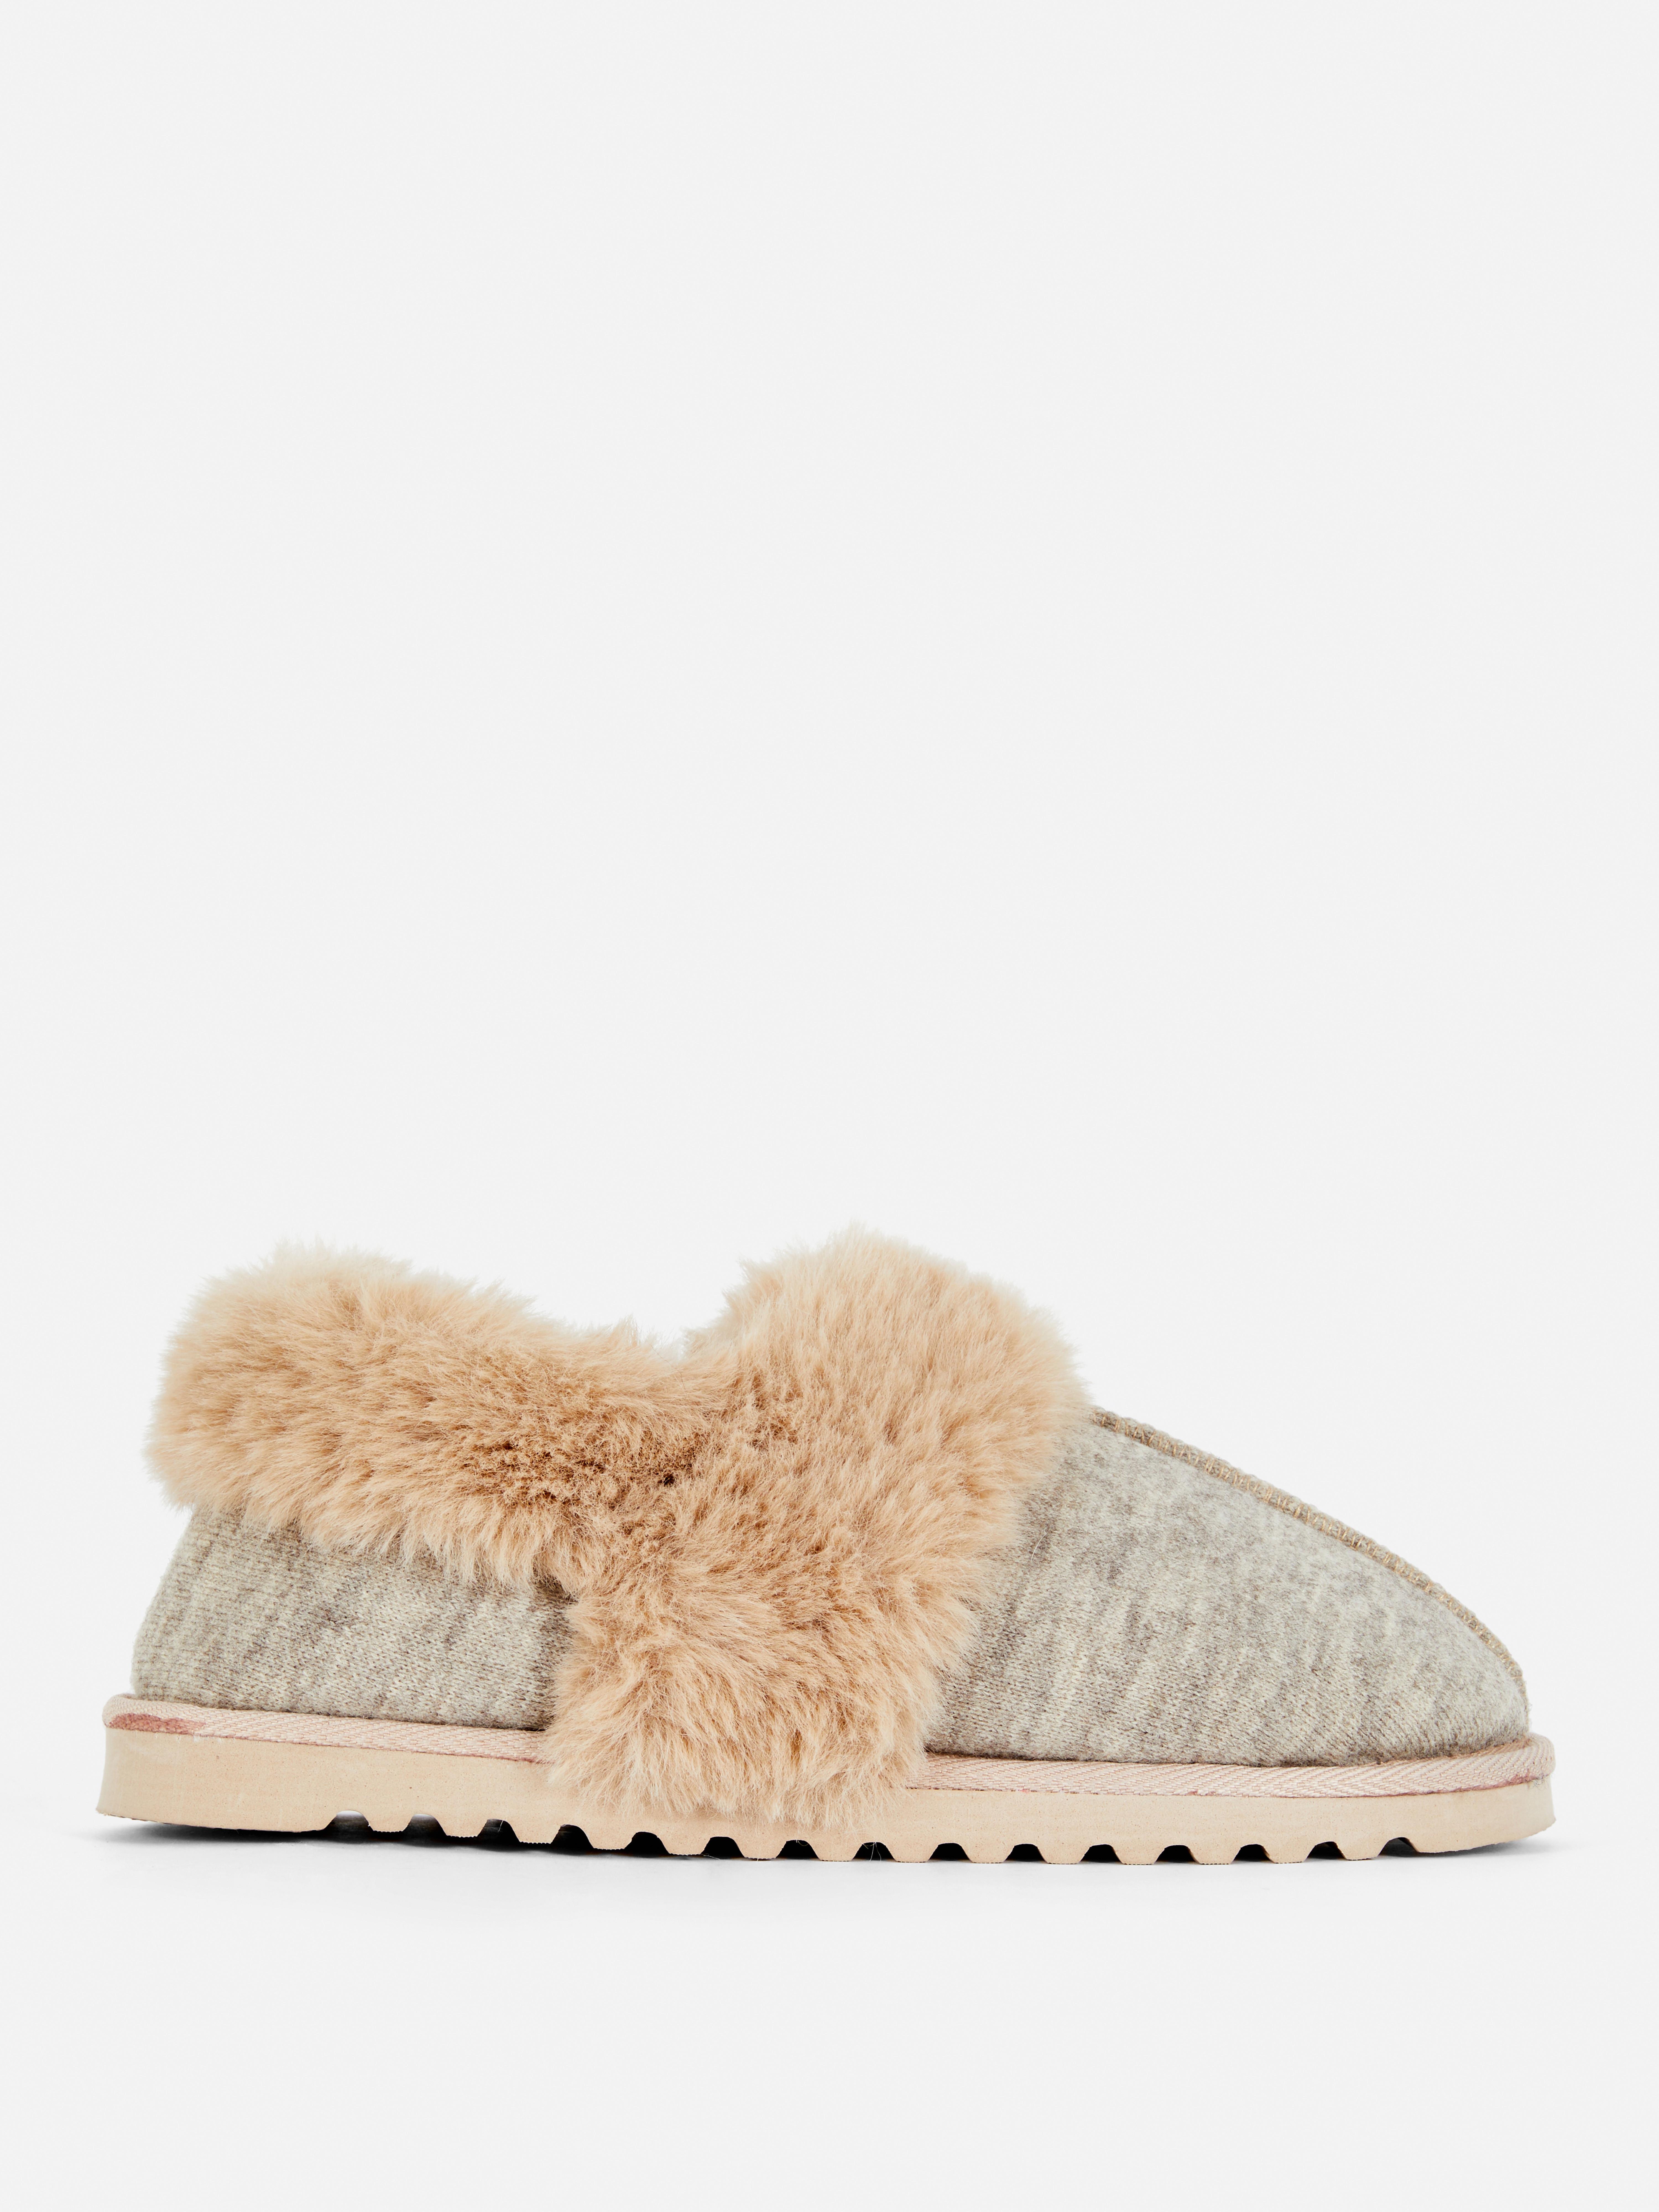 Faux Fur Moccasin Style Slippers Beige